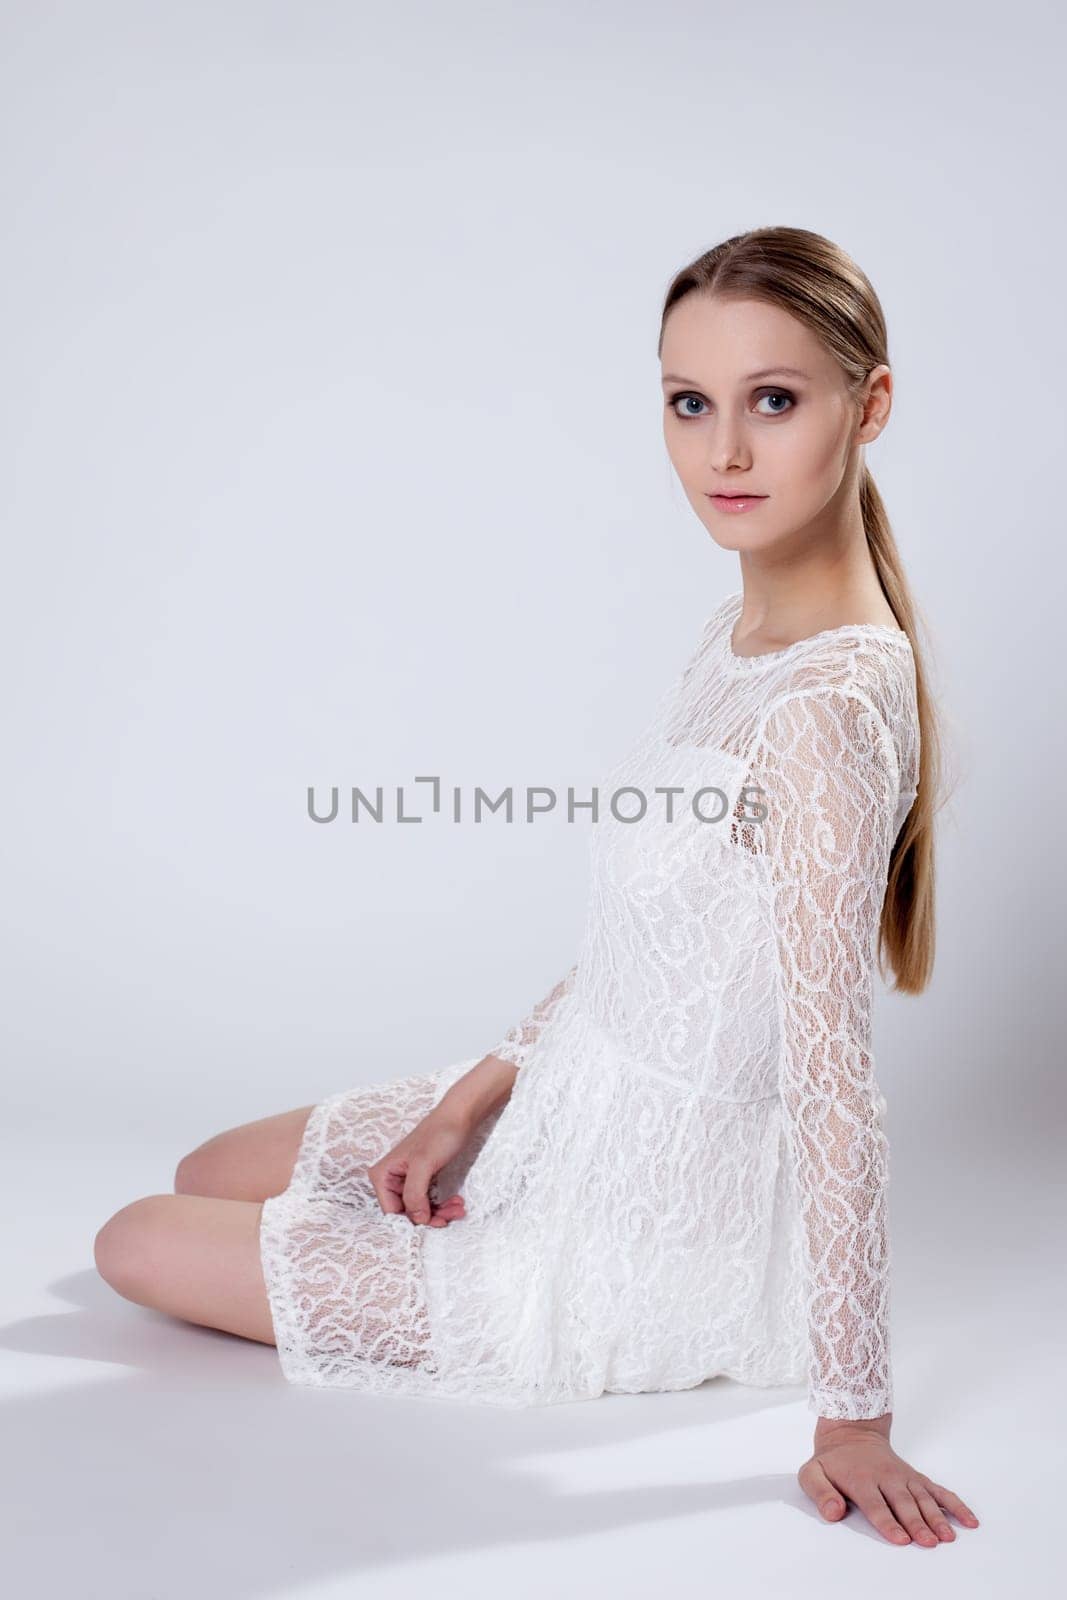 Romantic young girl posing in elegant dress by rivertime